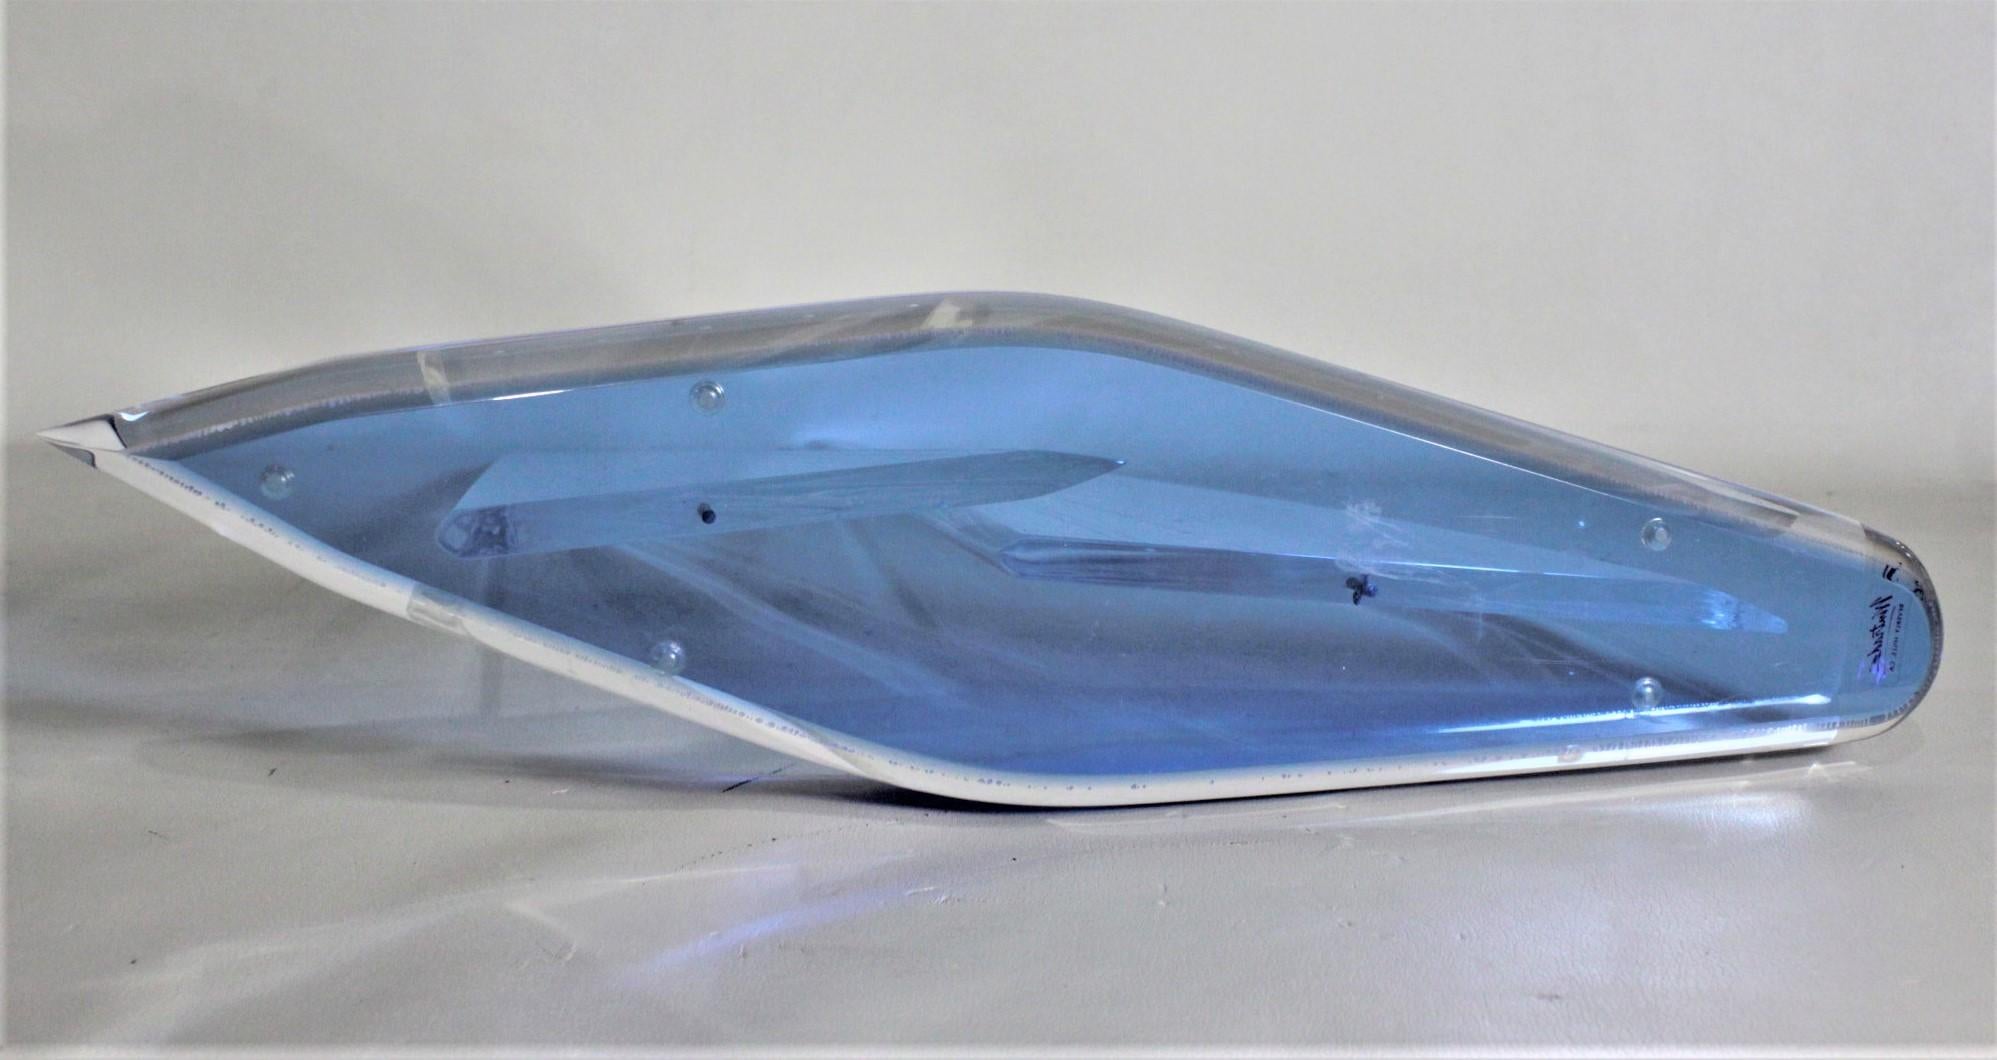 Vintage Blue & Clear Lucite Racing Sailboat Sculpture by Wintrade, Beverly Hills For Sale 1